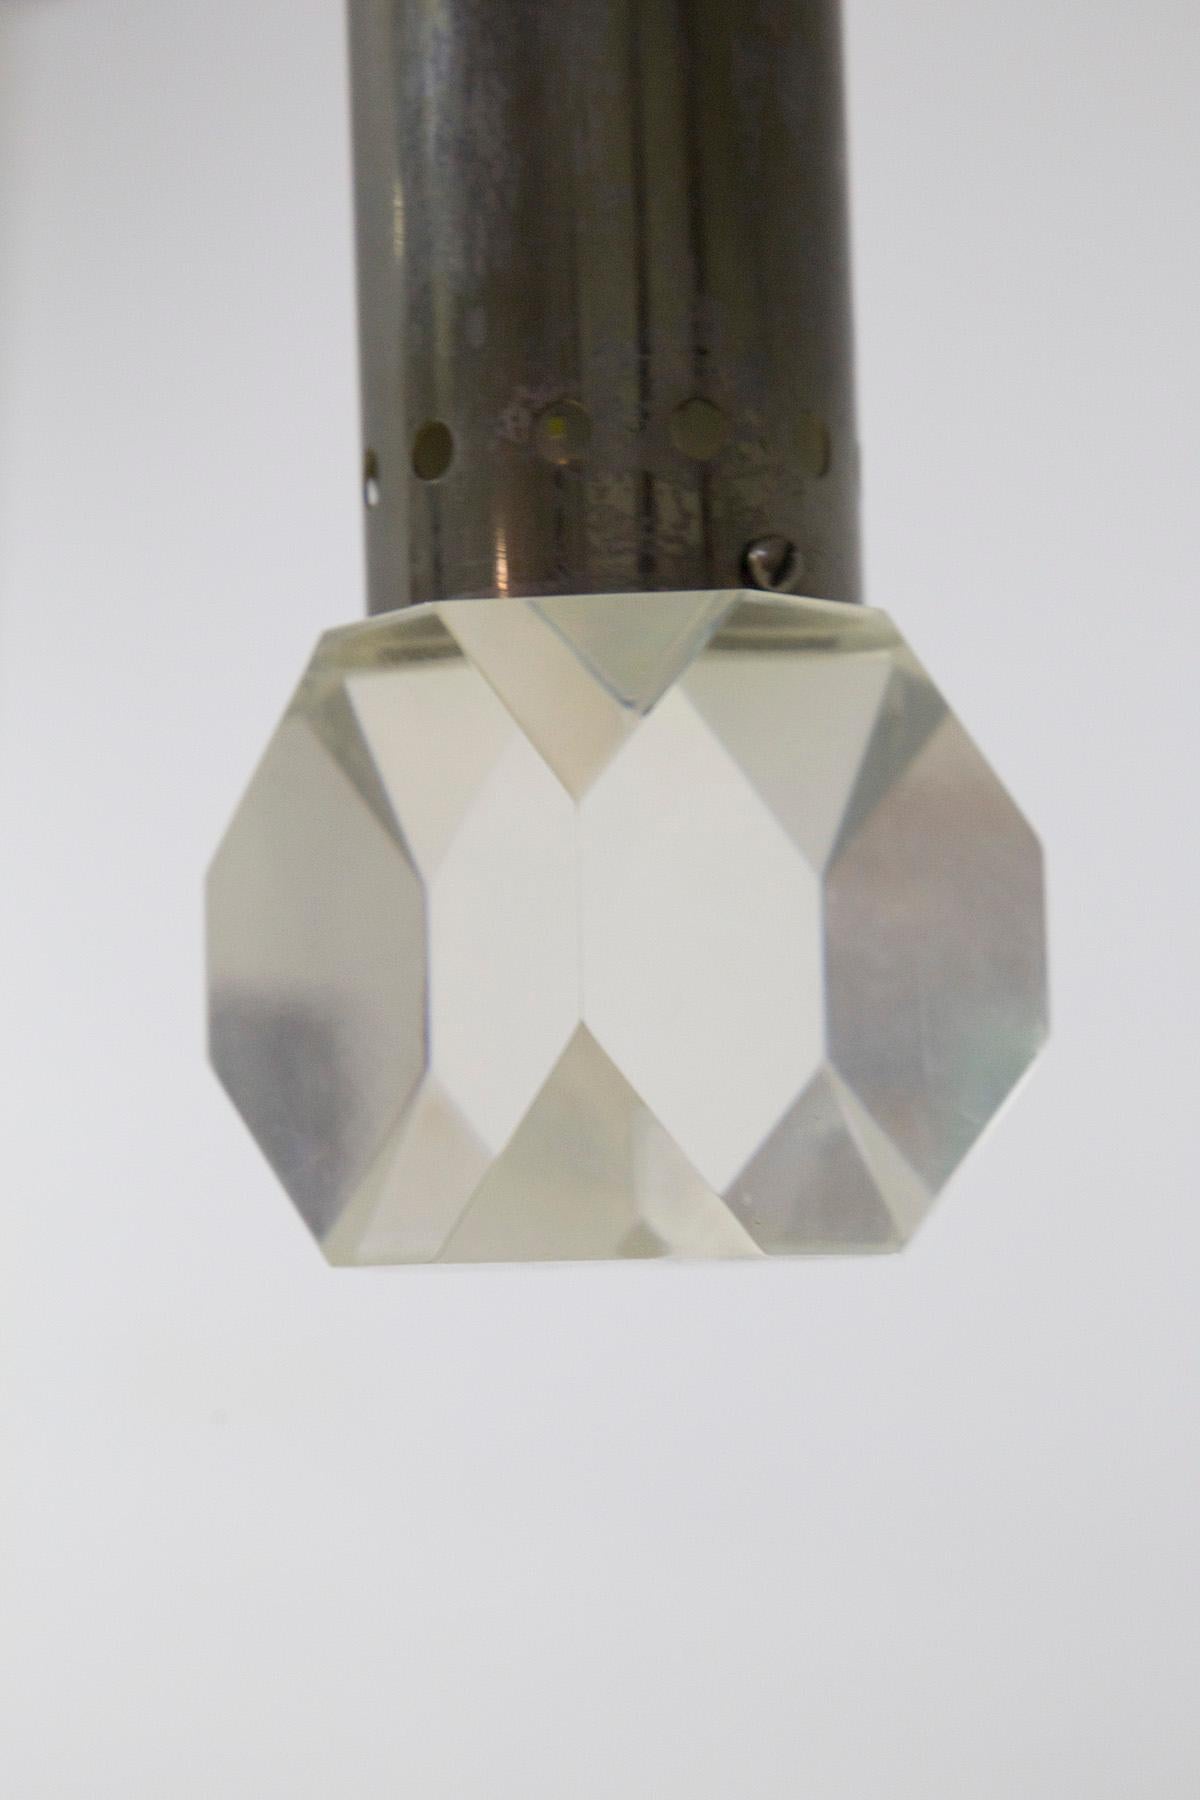 Beautiful pendant designed and produced by the fine Italian manufacturer Stilux in the 1950s.
The structure is made of durable aluminum and consists of an aluminum cylinder. 
The lamp ends with a glass bulb cover, worked to create diamond-like